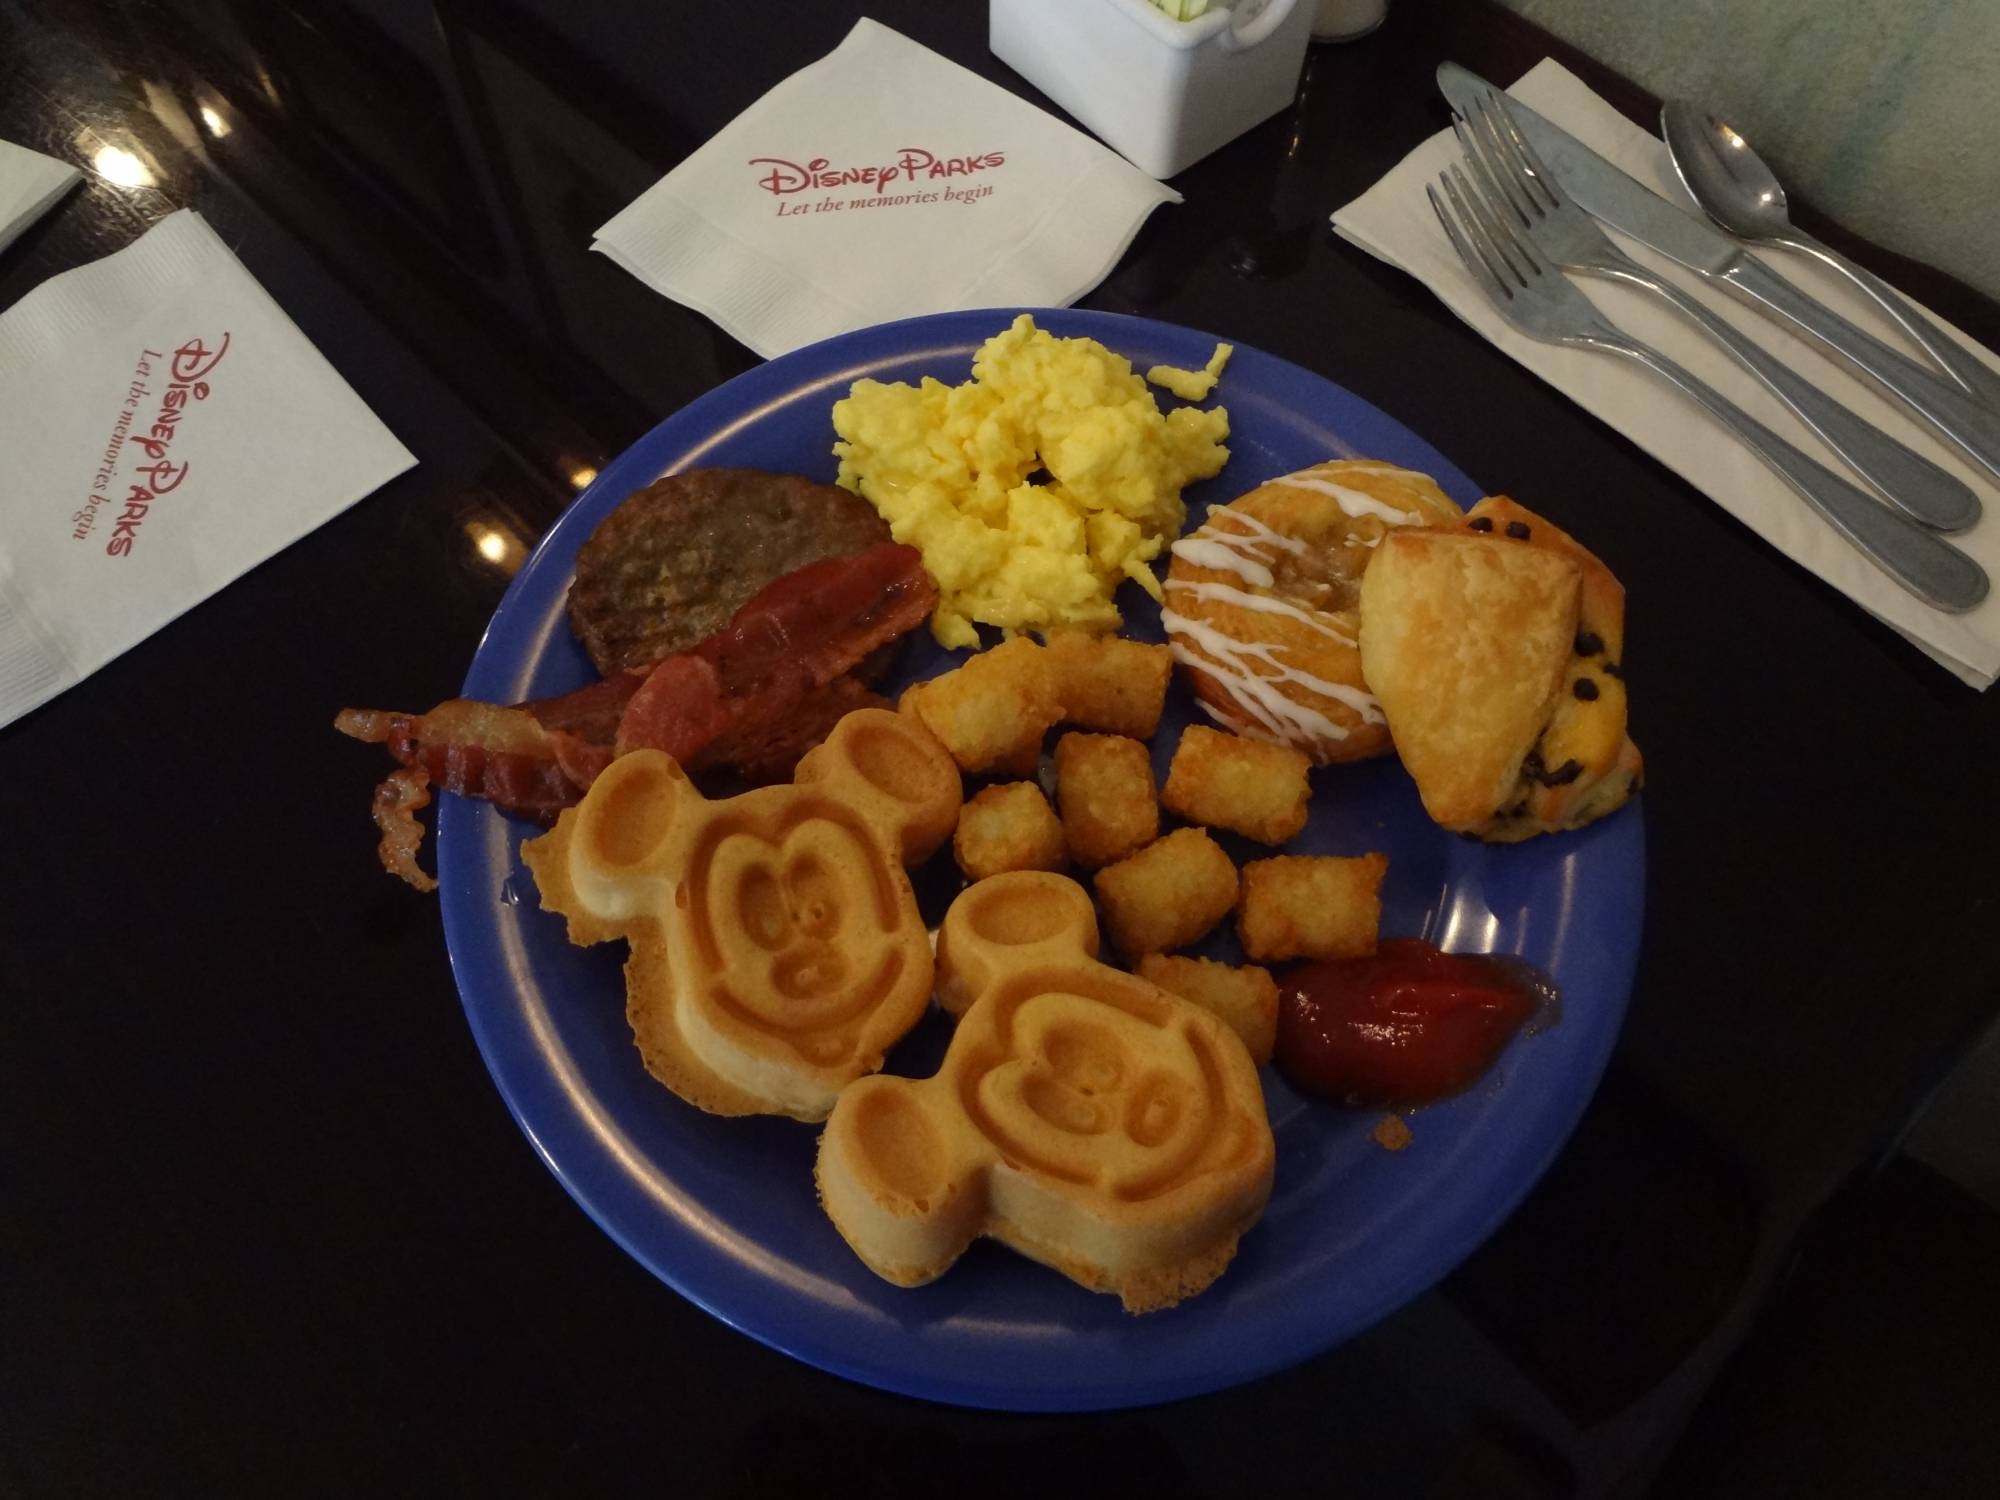 Stretch your dining dollars by having breakfast in your Disney hotel room | PassPorter.com